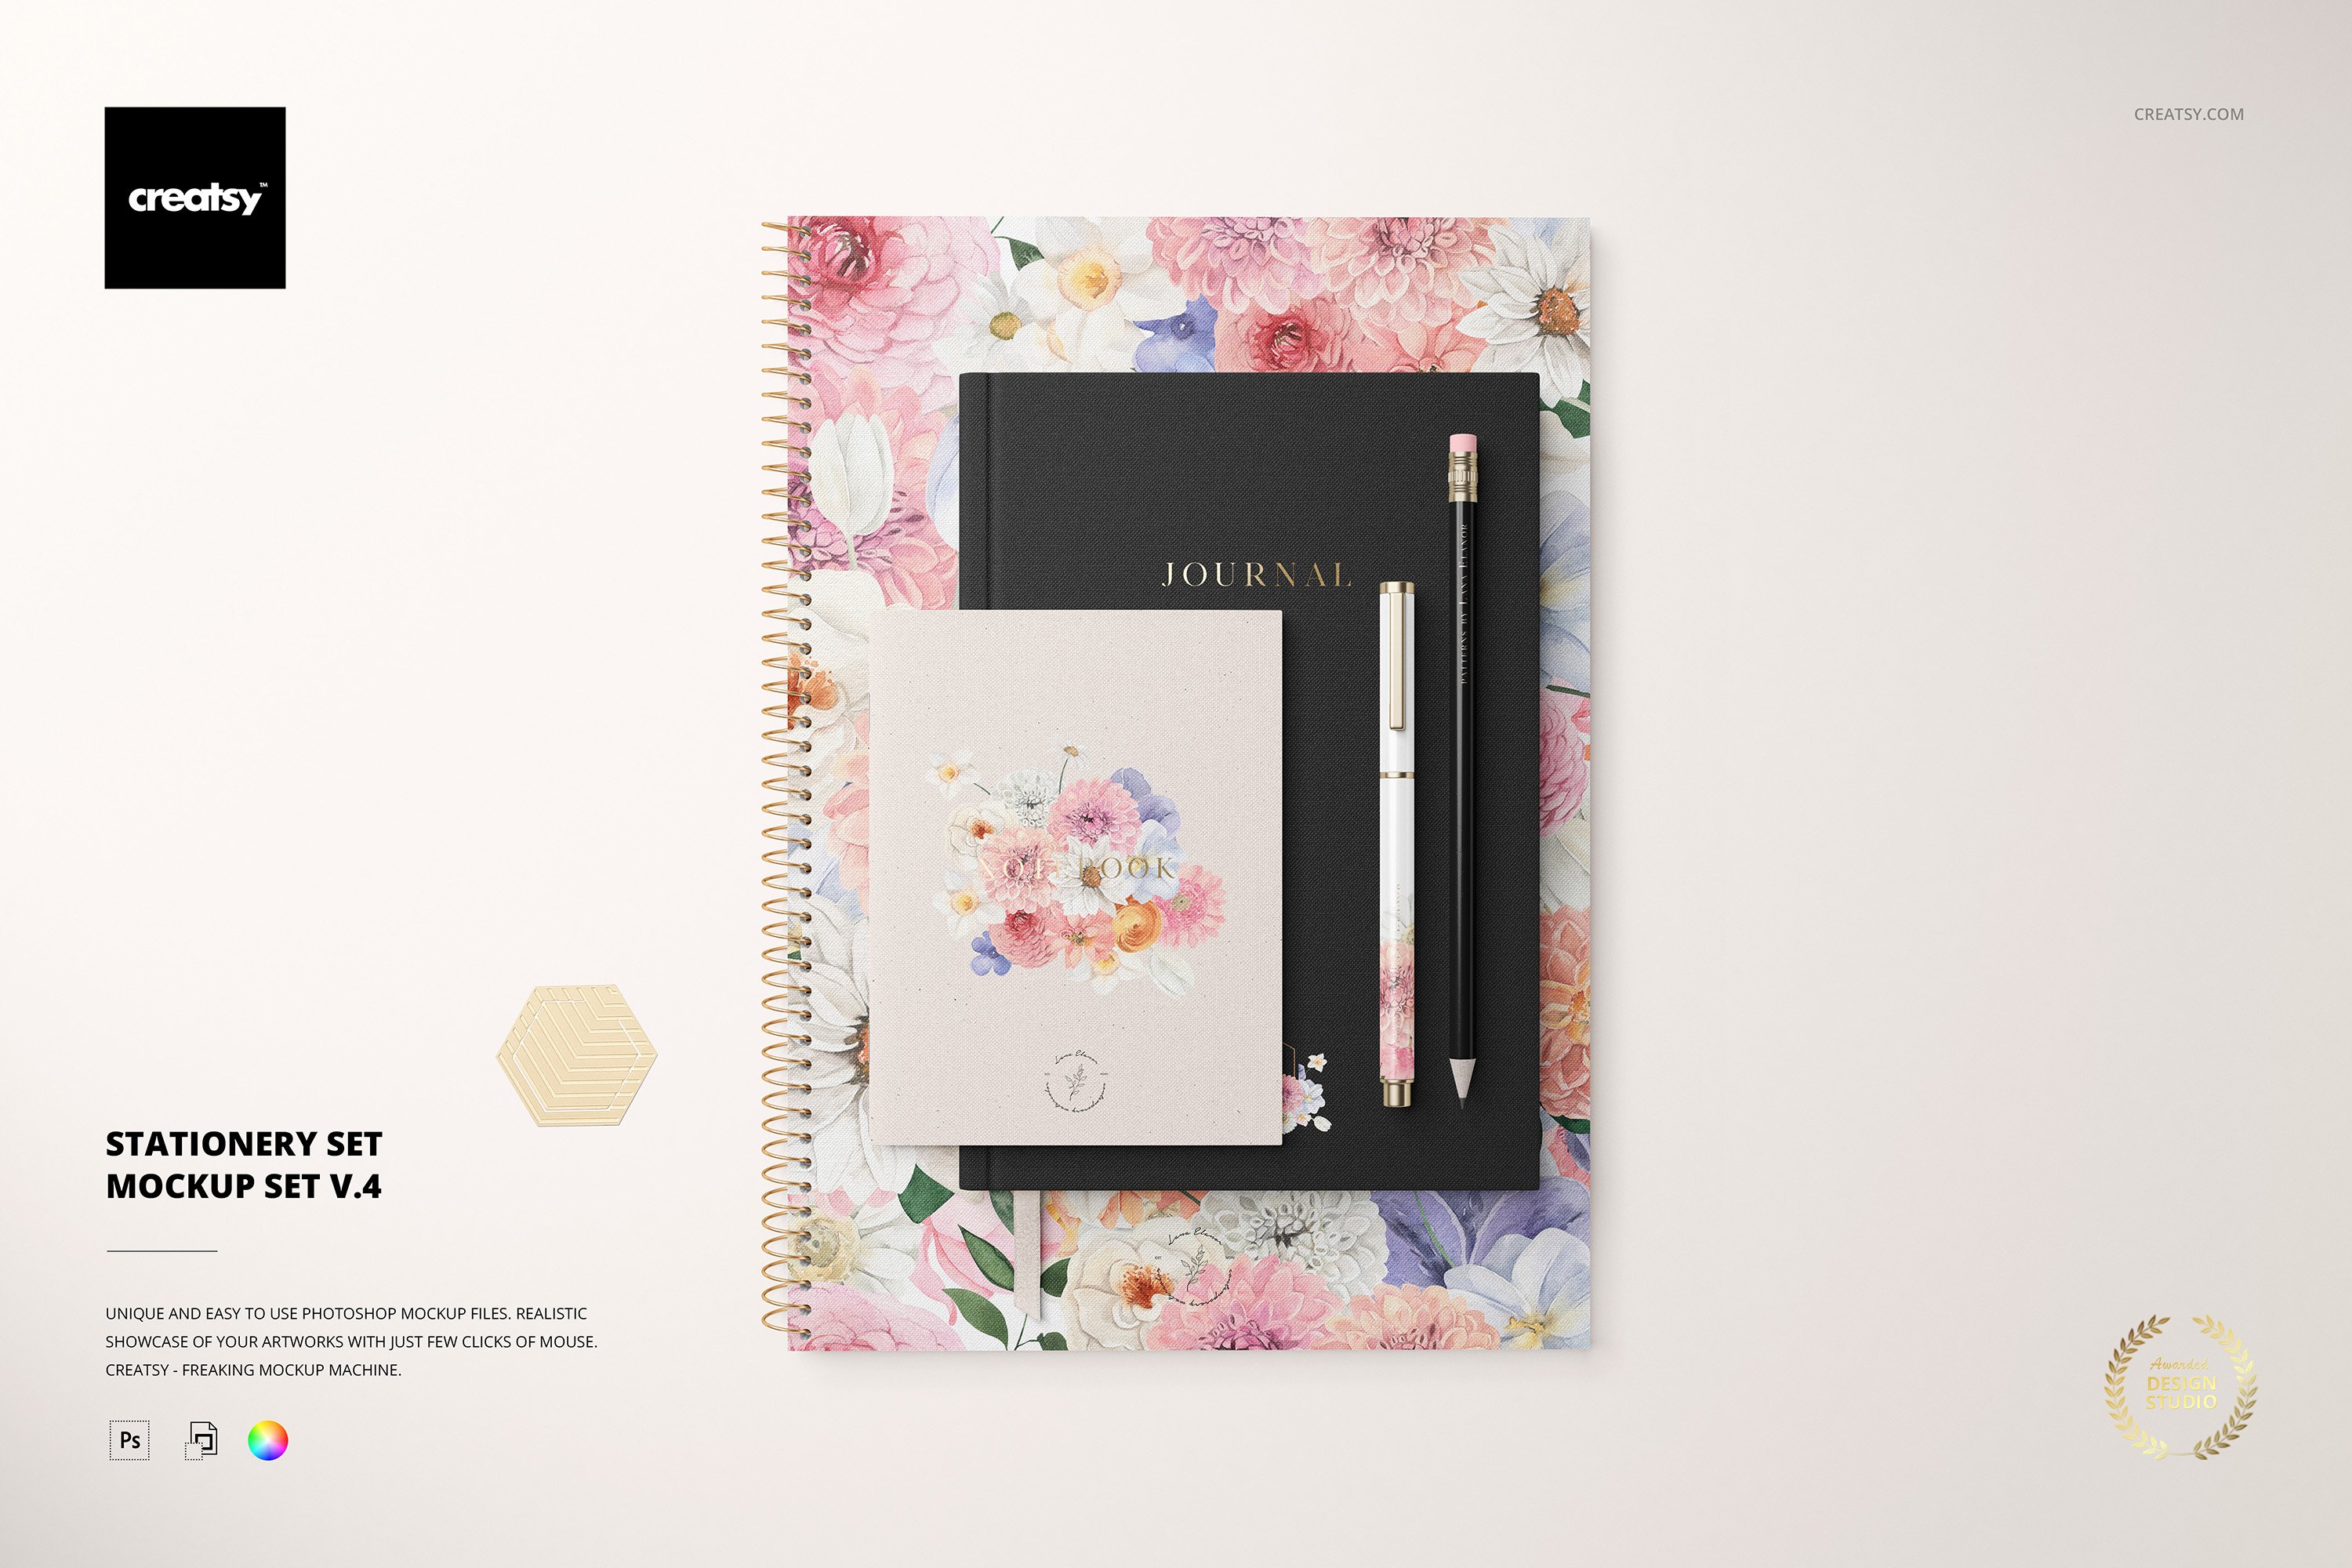 Colorful and flowers blossom notebooks.